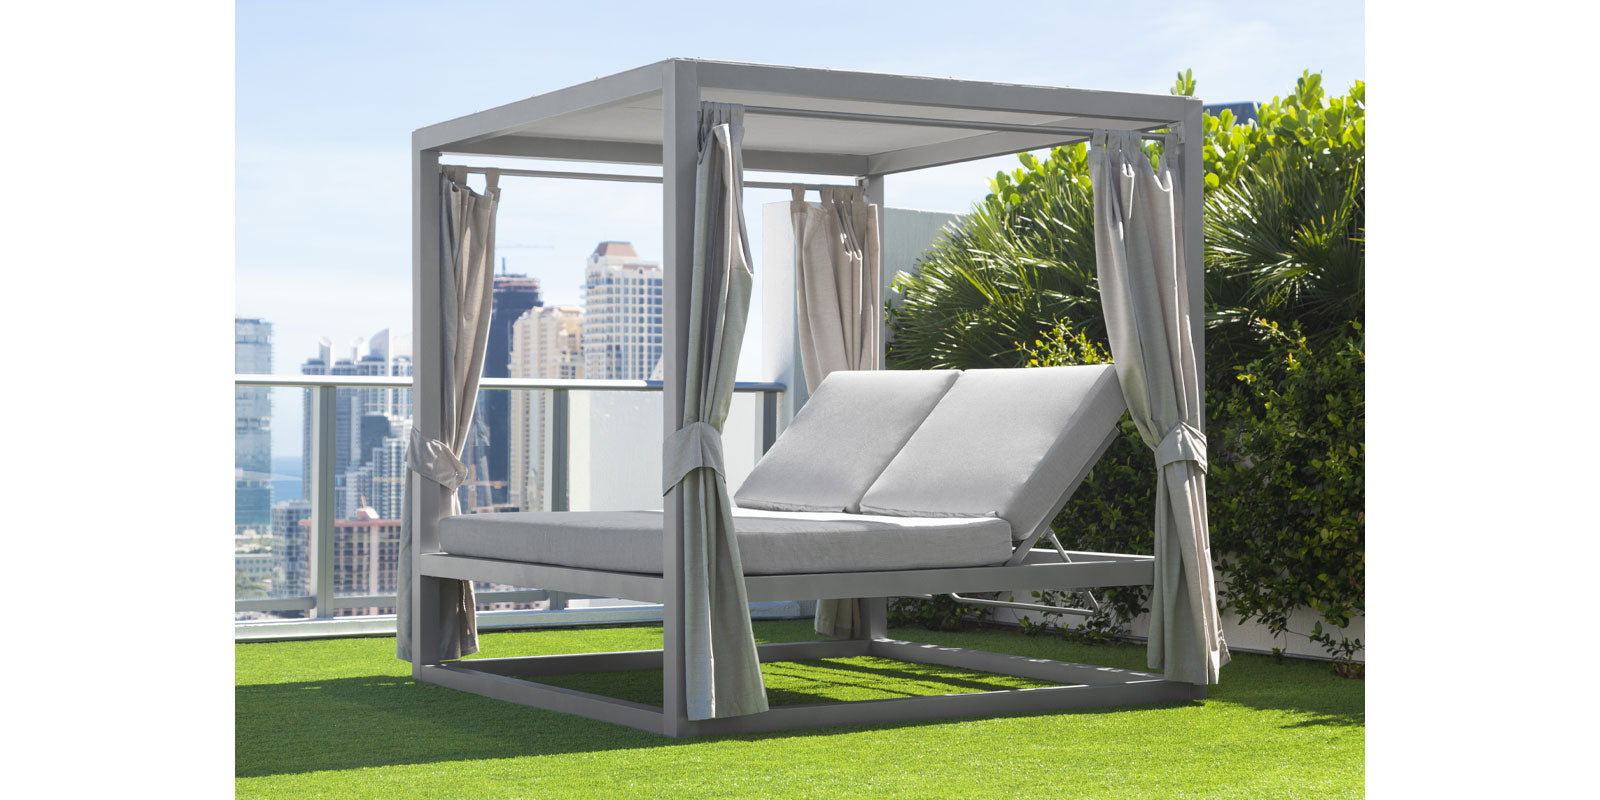 gallery01_breeze_daybed-BetterPatio-SourceFurniture.jpeg__PID:2e0ff272-6581-4d36-a04c-0aeb79506edc